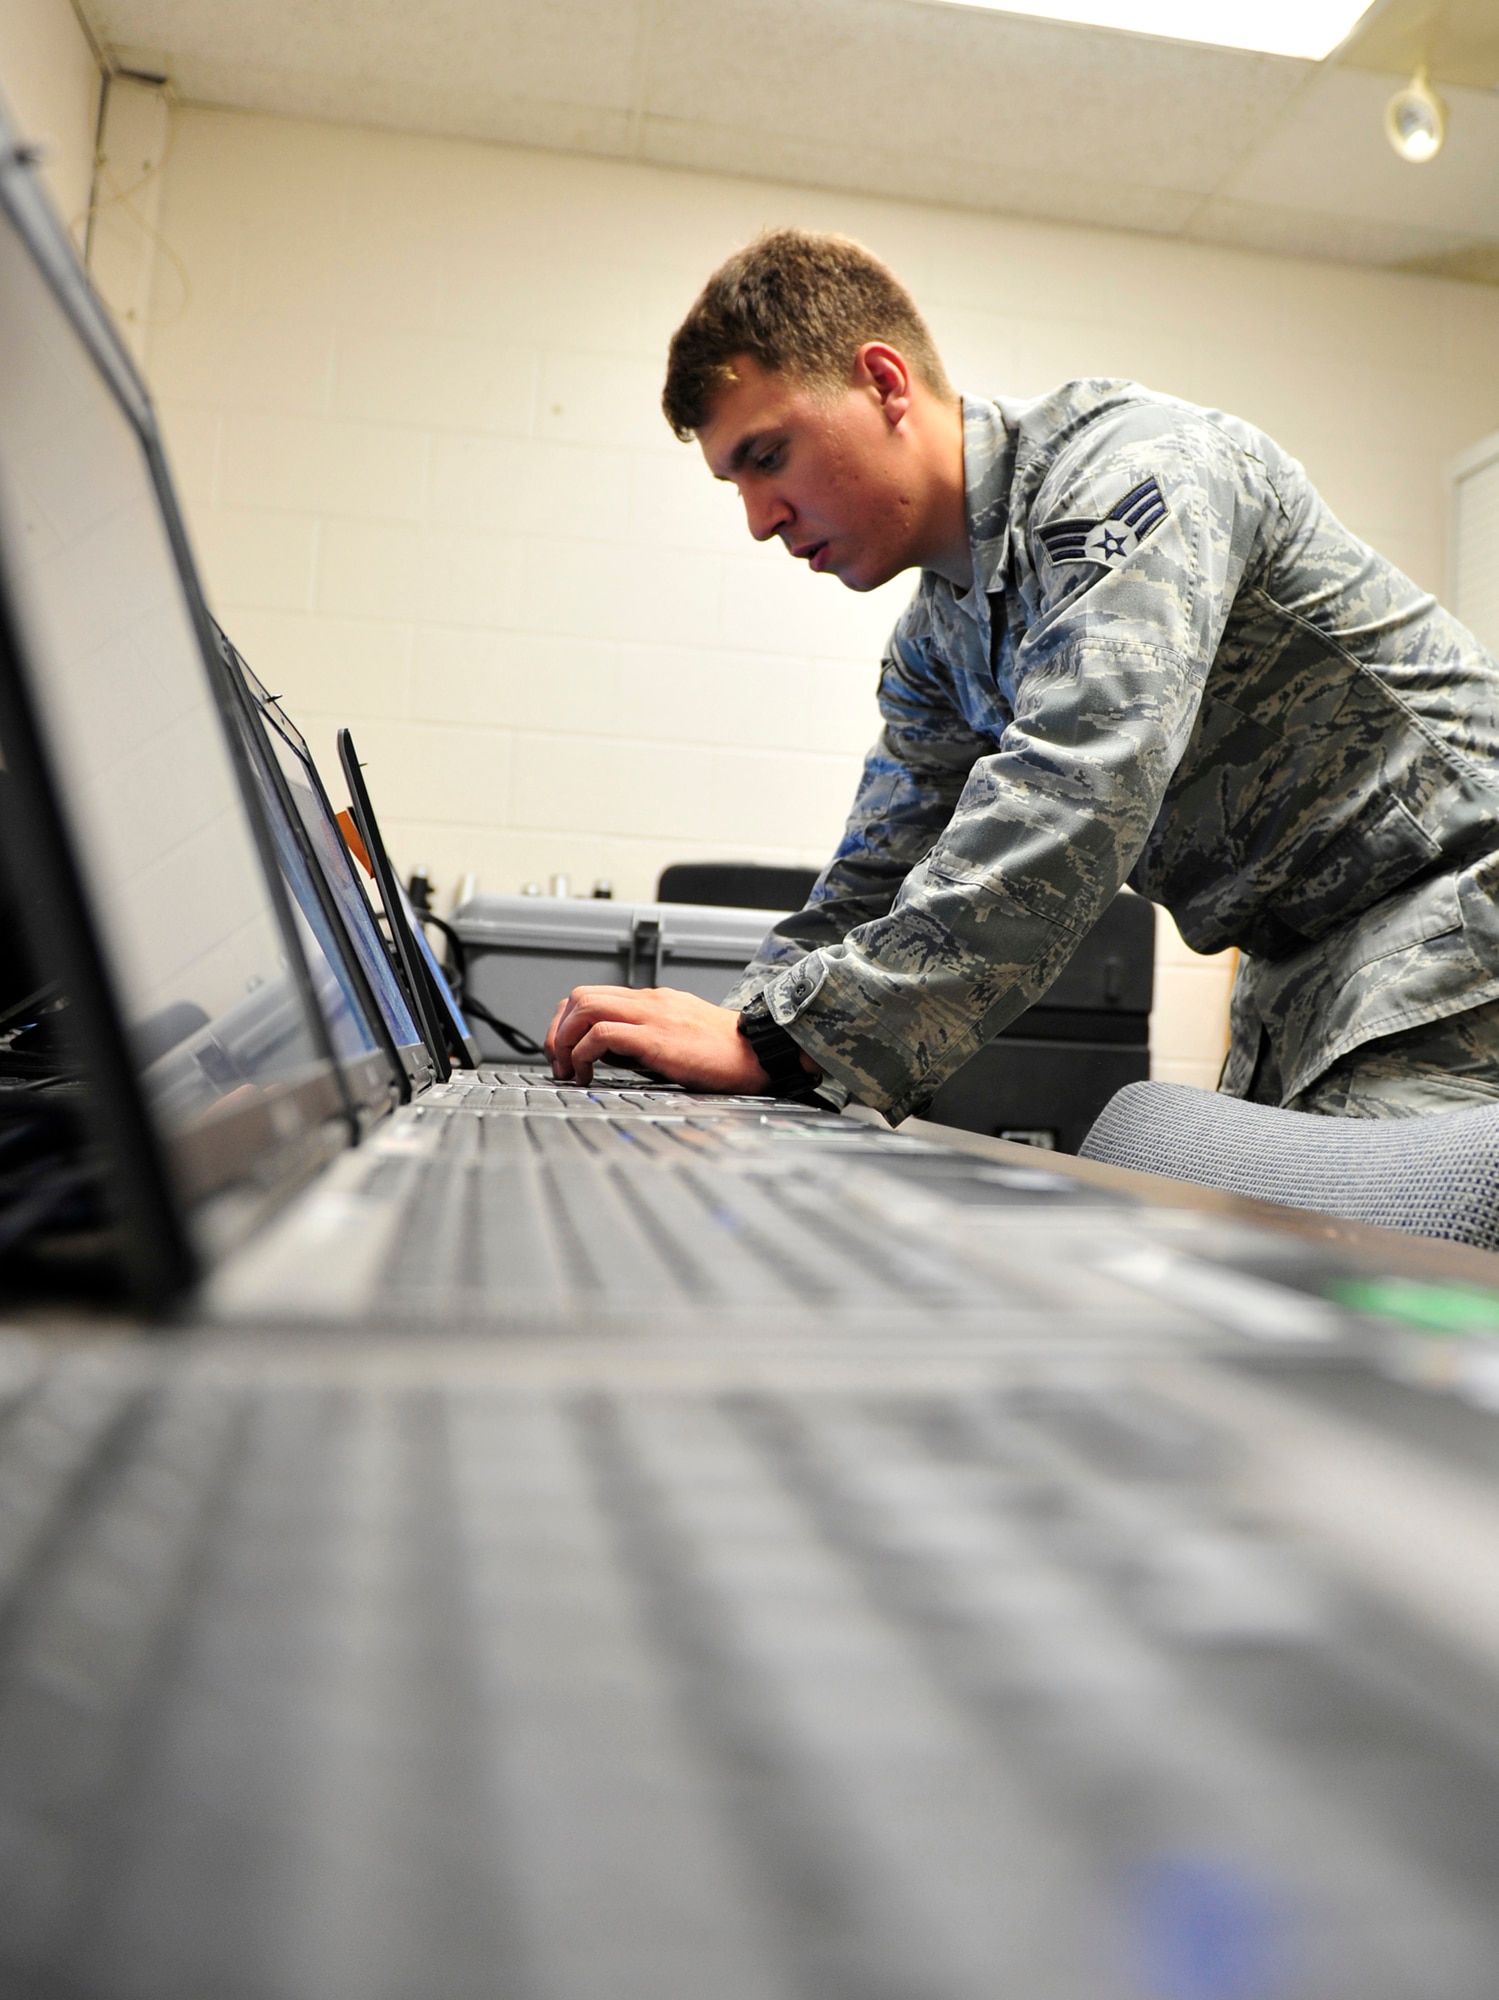 Minot Air Force Base’s Client System Technicians assigned to the 5th Communications Squadron provide computer support to more than 6,000 users across the base and are responsible for all computer maintenance, hand-held radio maintenance, and public announcement setup requests. If there is an issue with any computer on base, it is handled primarily by the 5th CS CST team. The unit’s motto is “FROM THE DESK TO THE WALL, WE DO IT ALL!” 